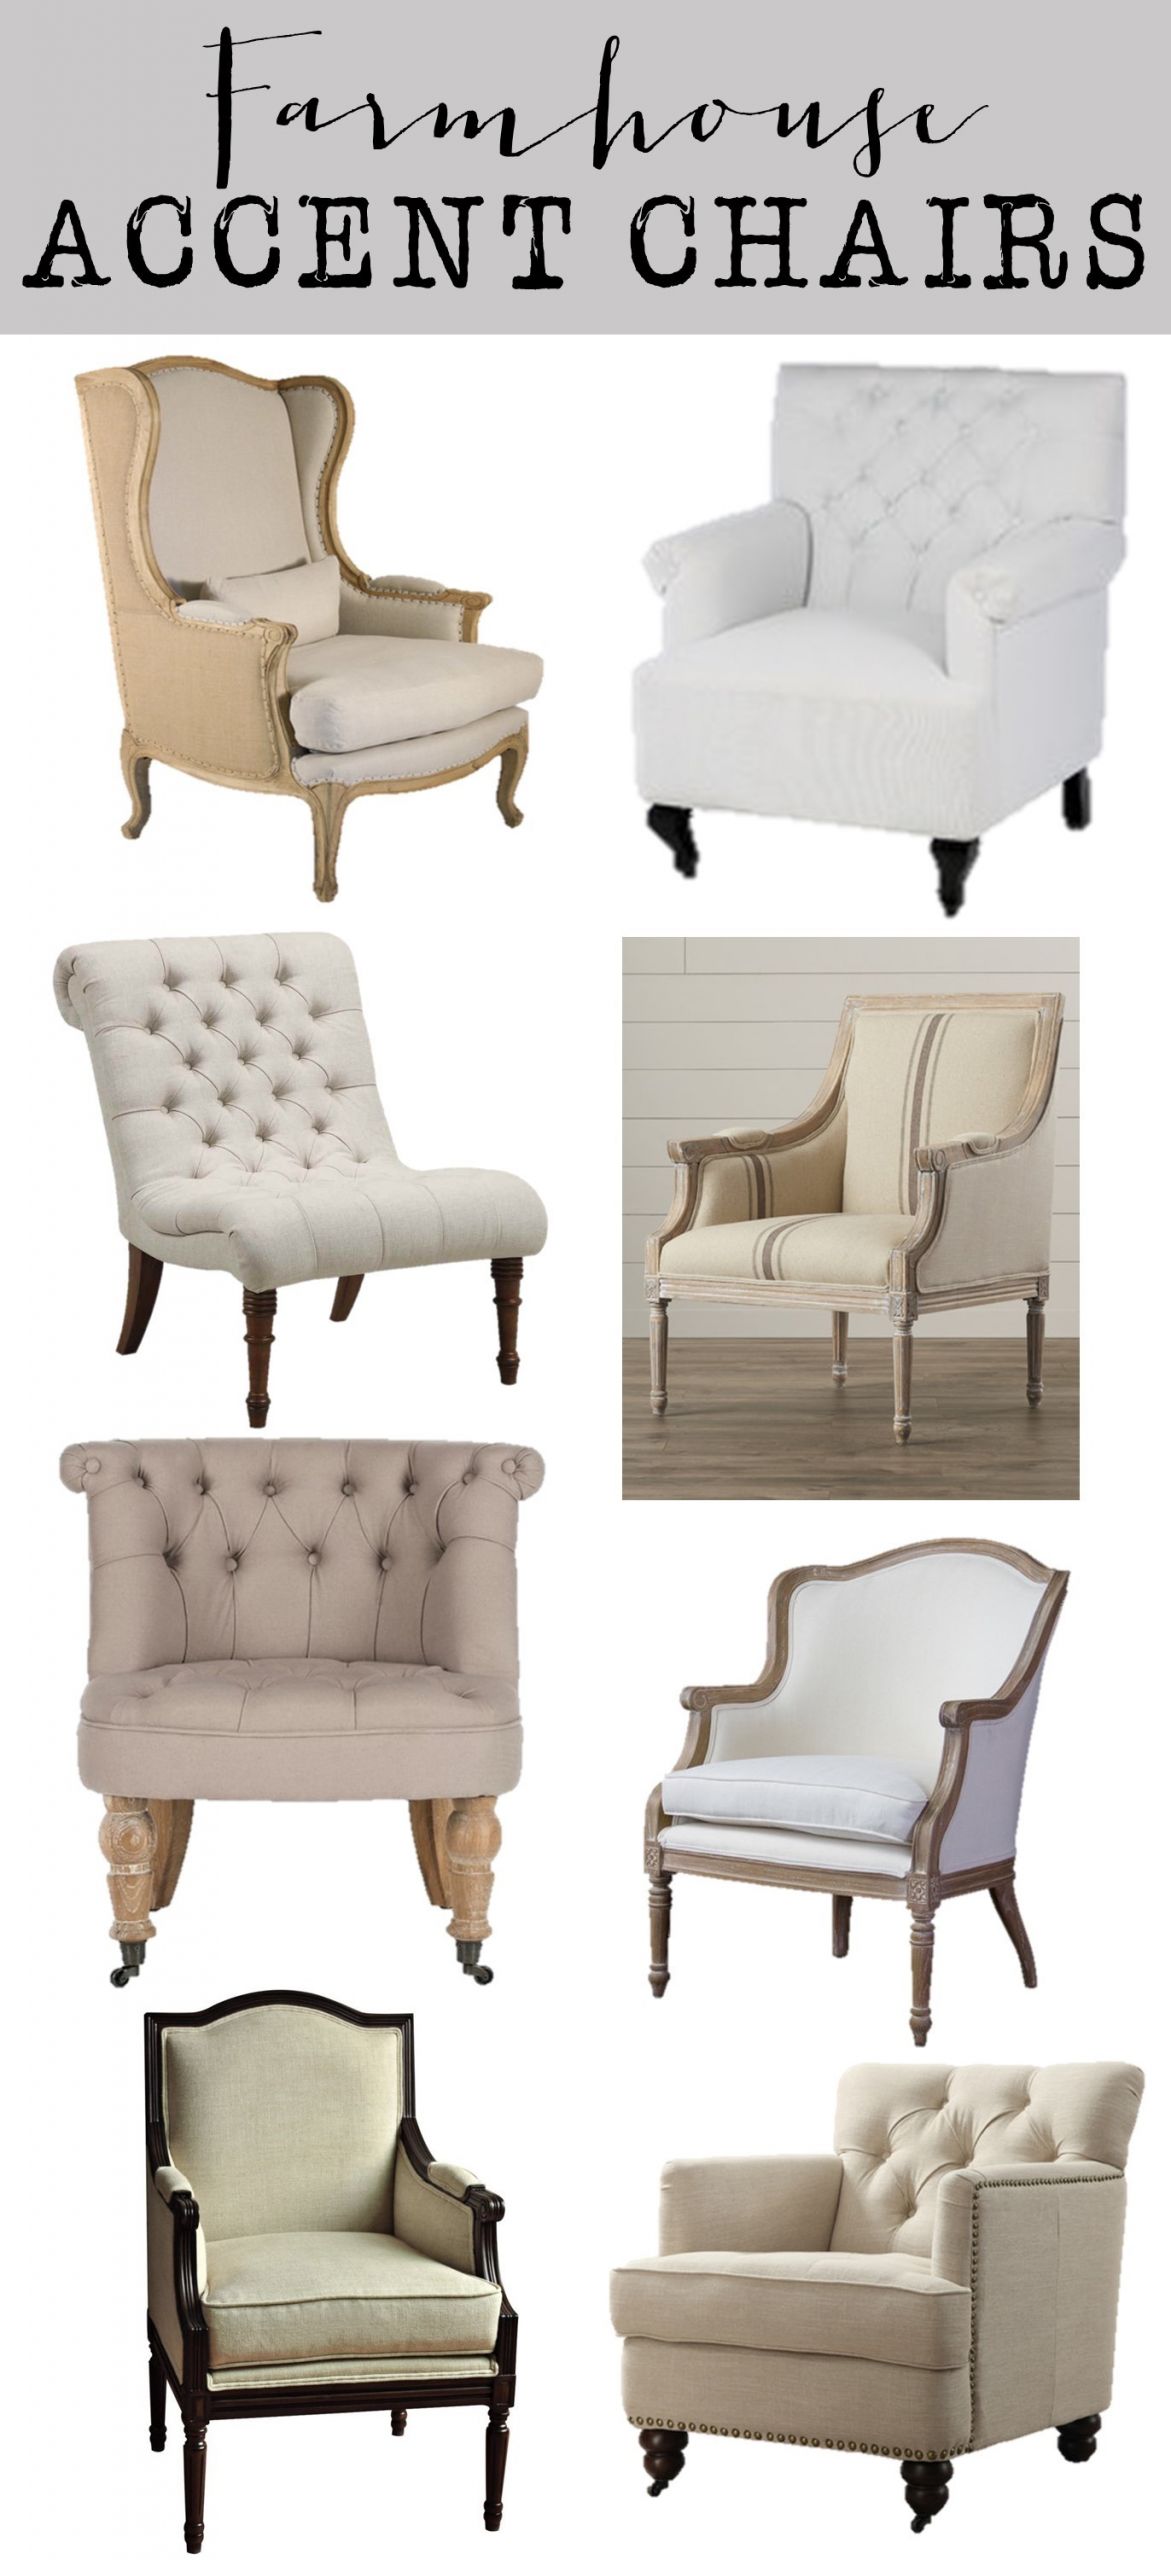 Farmhouse Living Room Chairs
 Friday Favorites Farmhouse Accent Chairs House of Hargrove